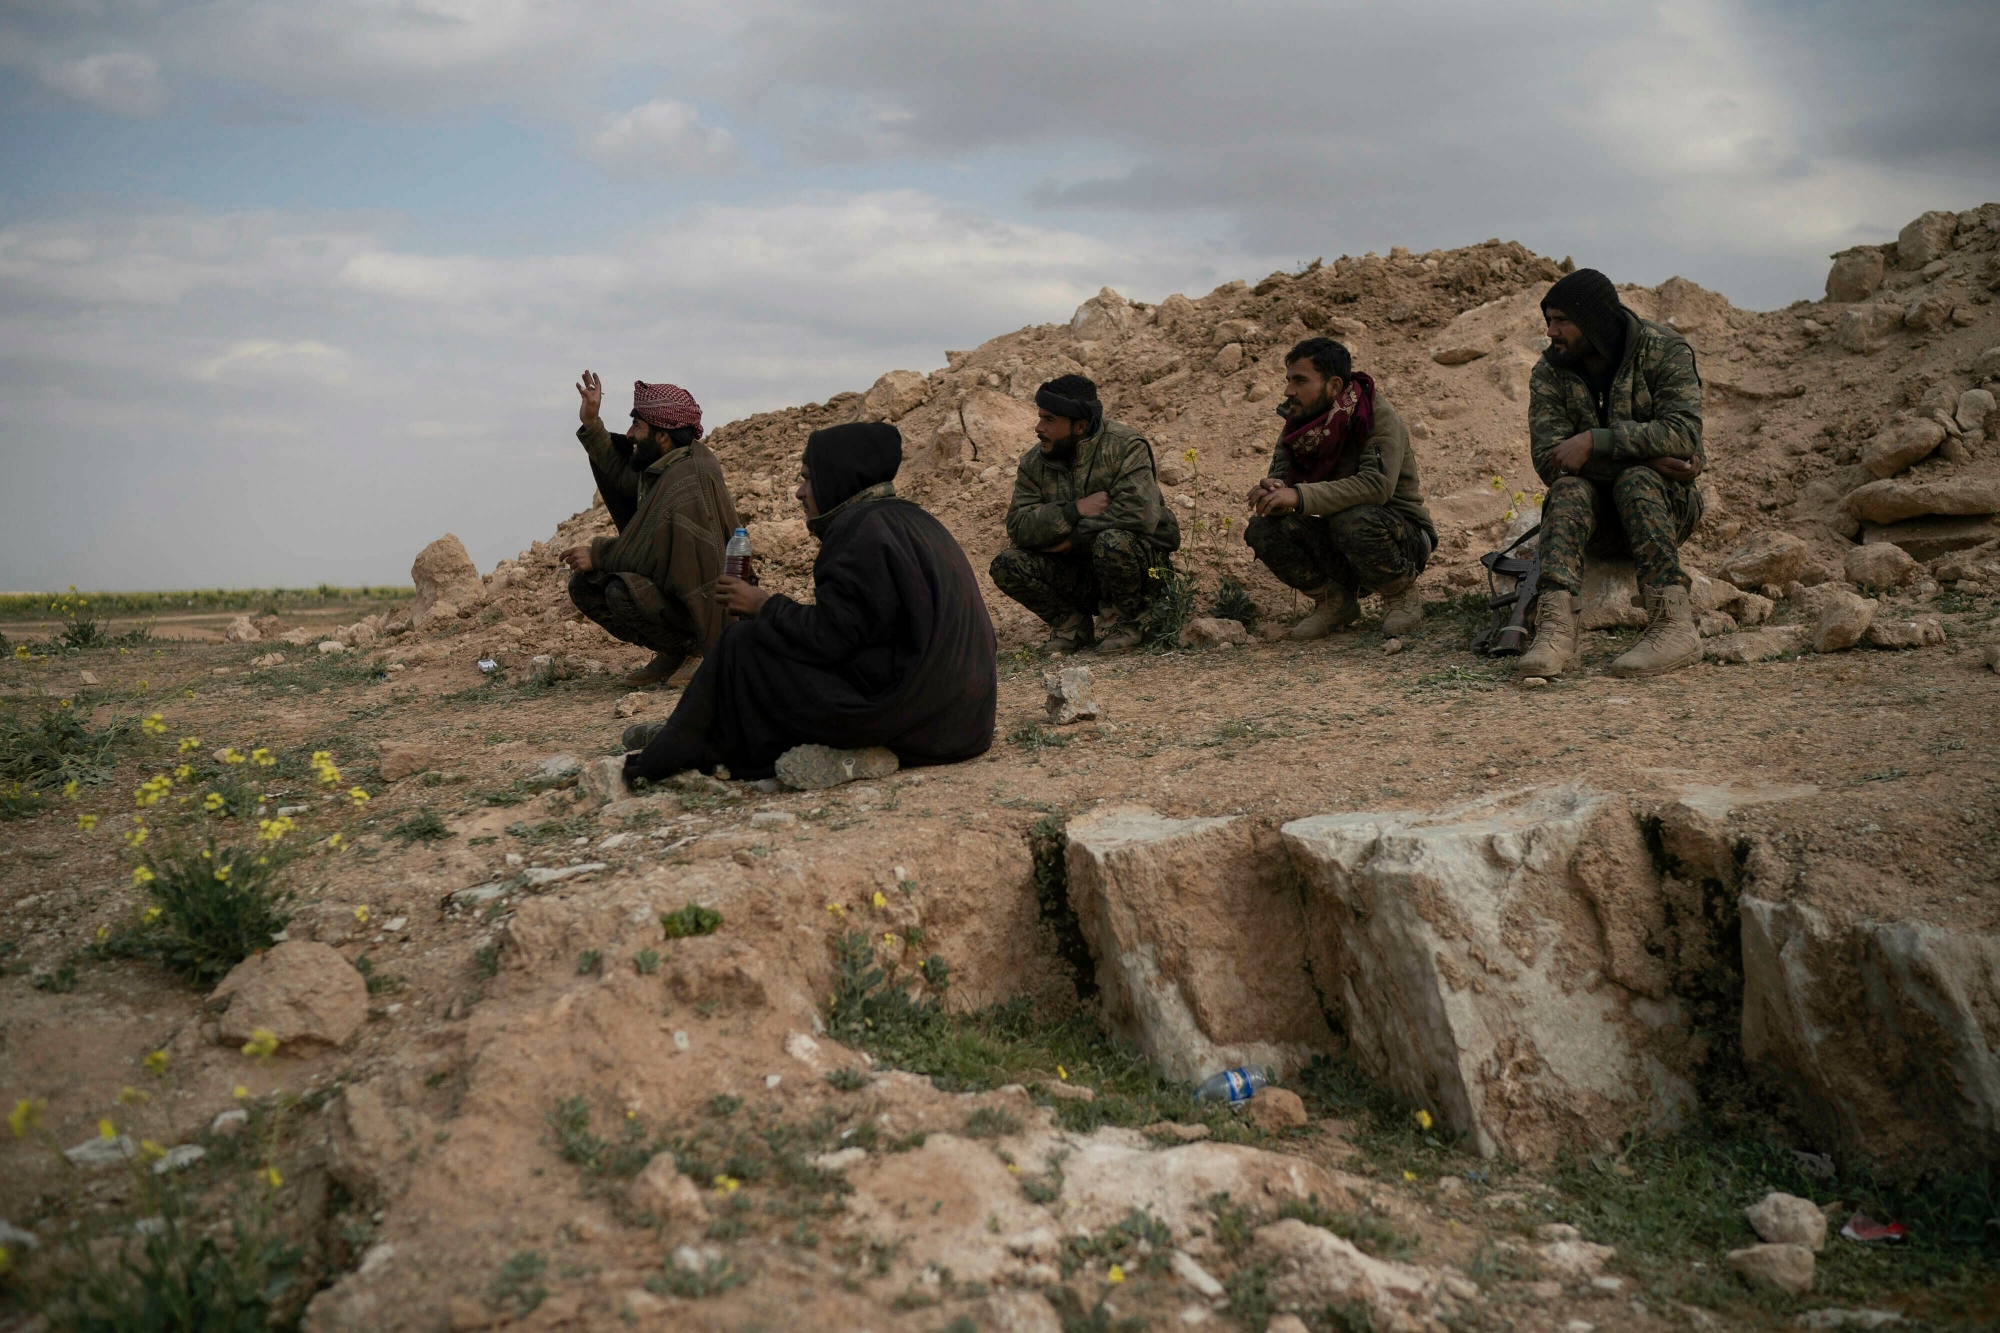 U.S.-backed Syrian Democratic Forces (SDF) fighters sit atop a hill in the desert outside the village of Baghouz, Syria, Thursday, Feb. 14, 2019. U.S.-backed Syrian forces are clearing two villages in eastern Syria of remaining Islamic State militants who are hiding among the local population, and detaining others attempting to flee with the civilians, the U.S.-led coalition said Thursday. (AP Photo/Felipe Dana) Syria